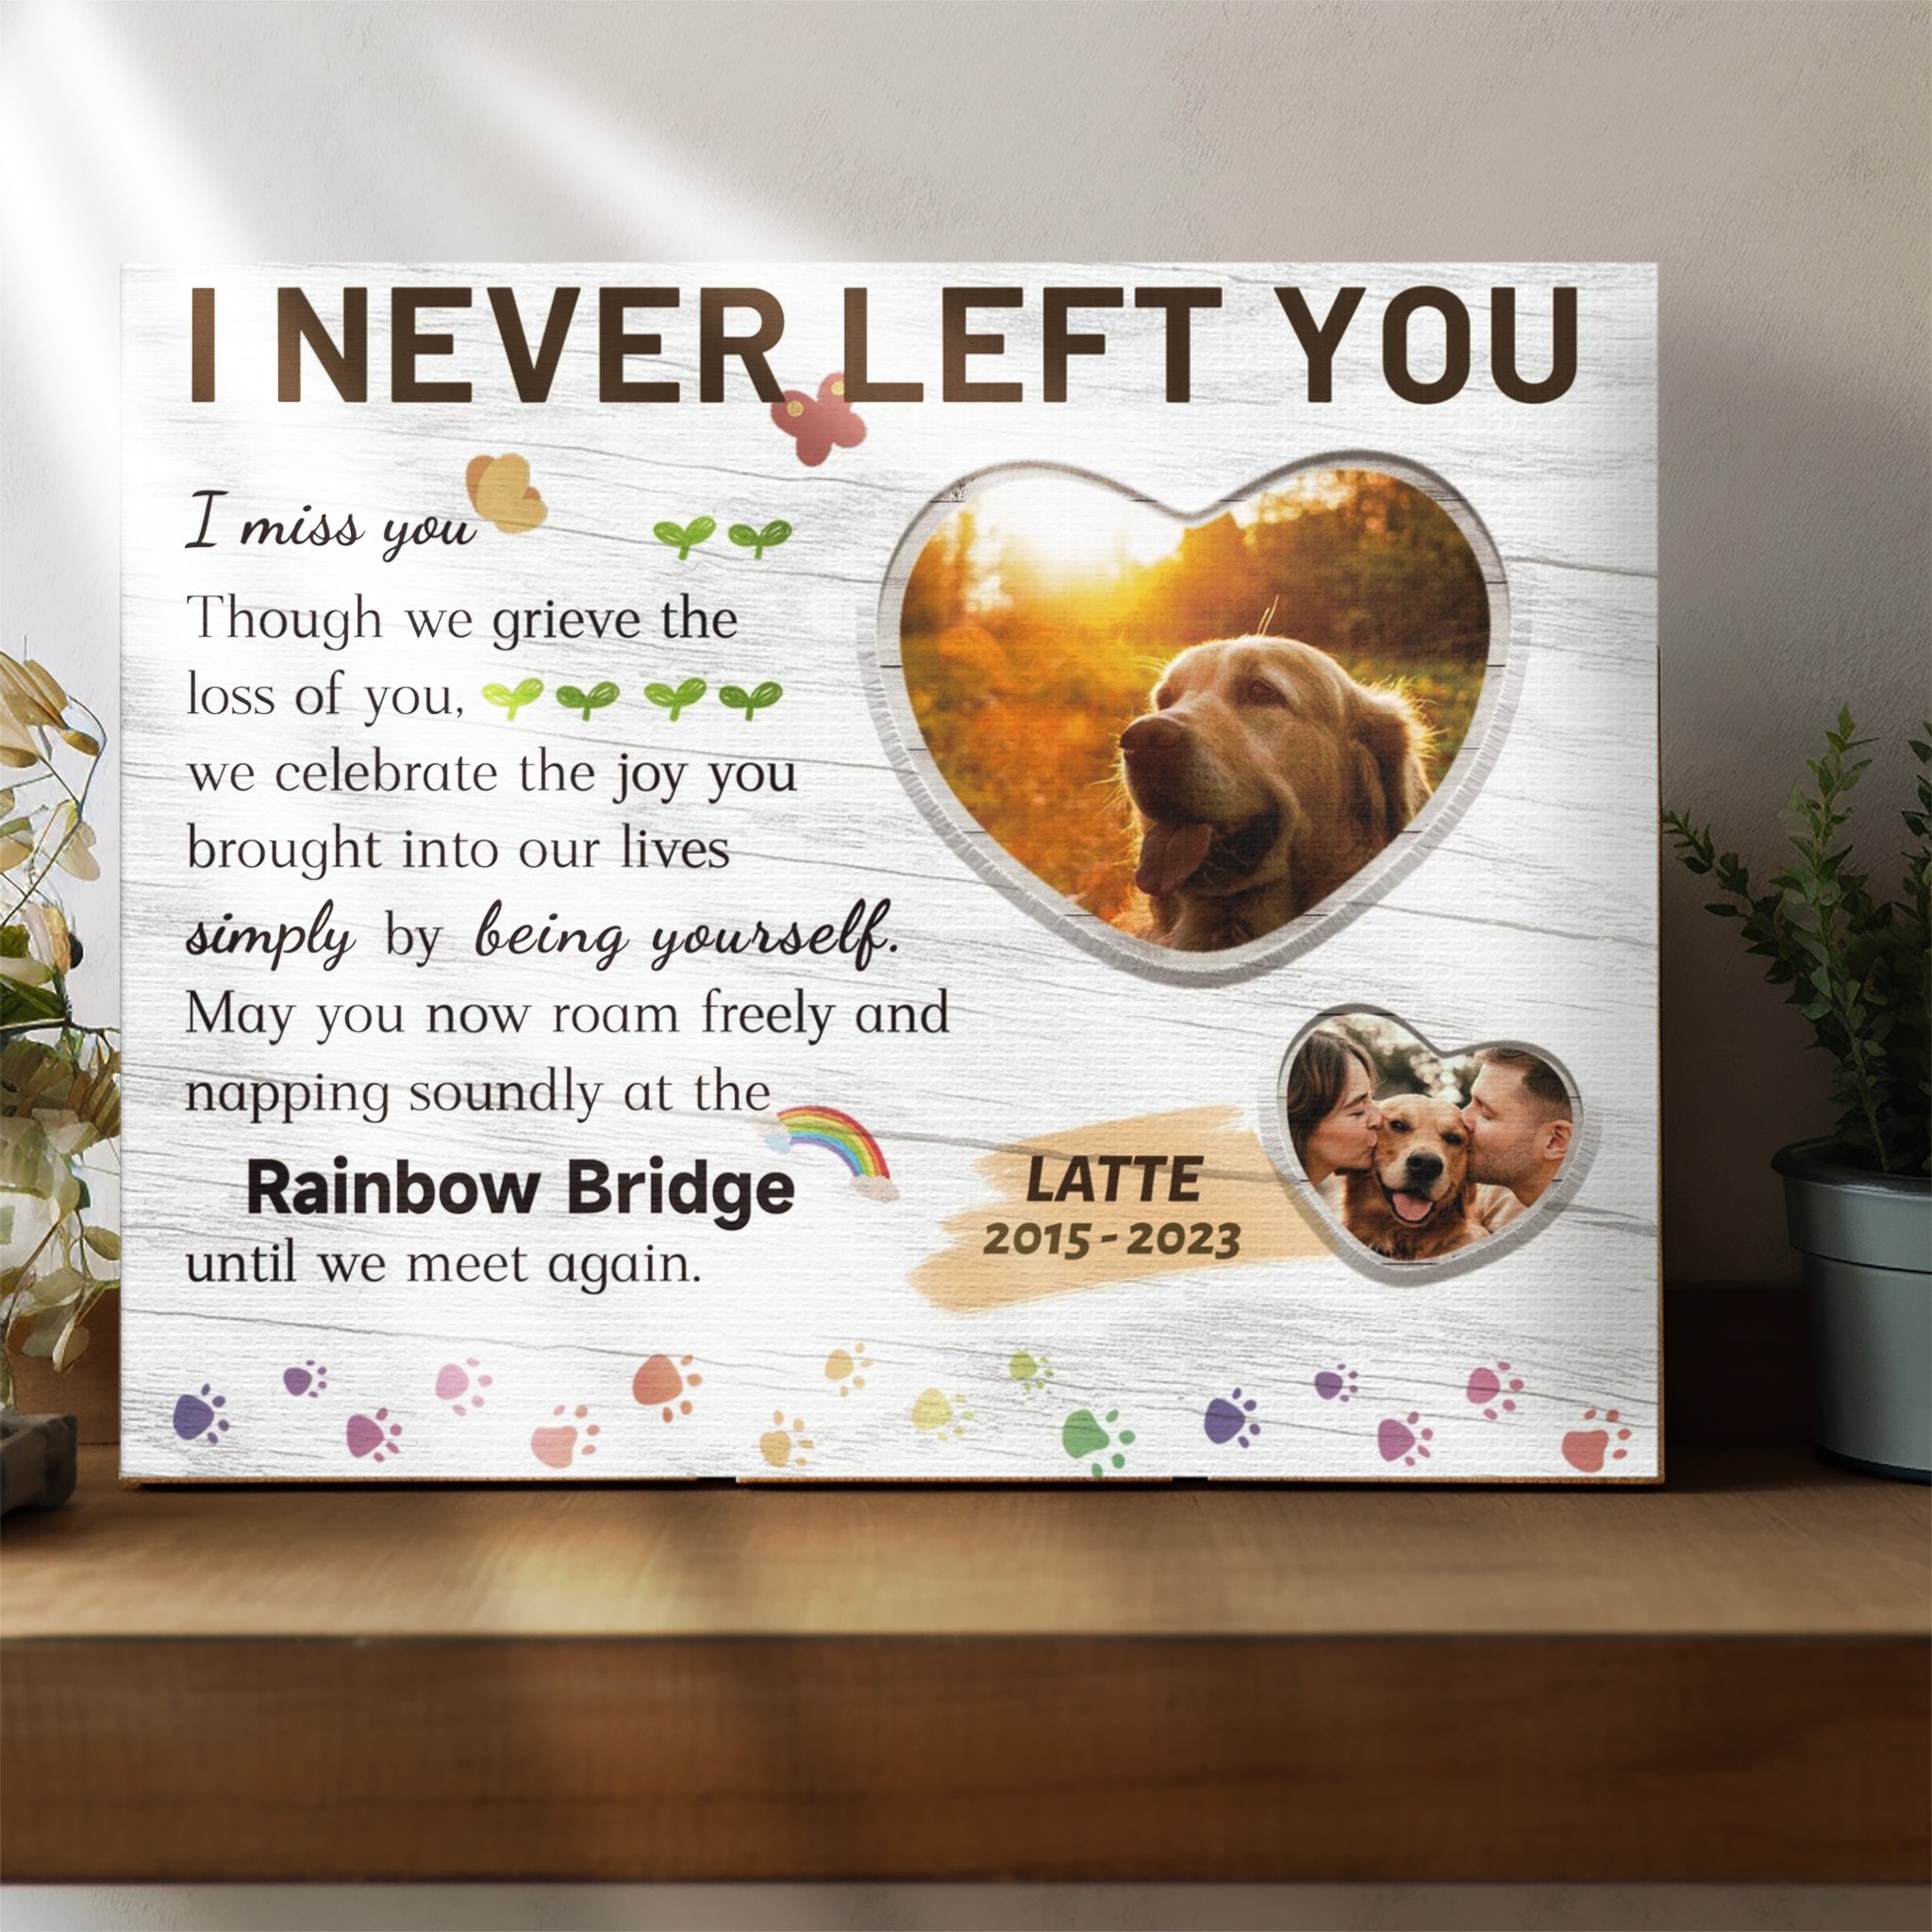 I Never Left You, White - Personalized Canvas Print Pet Memorial